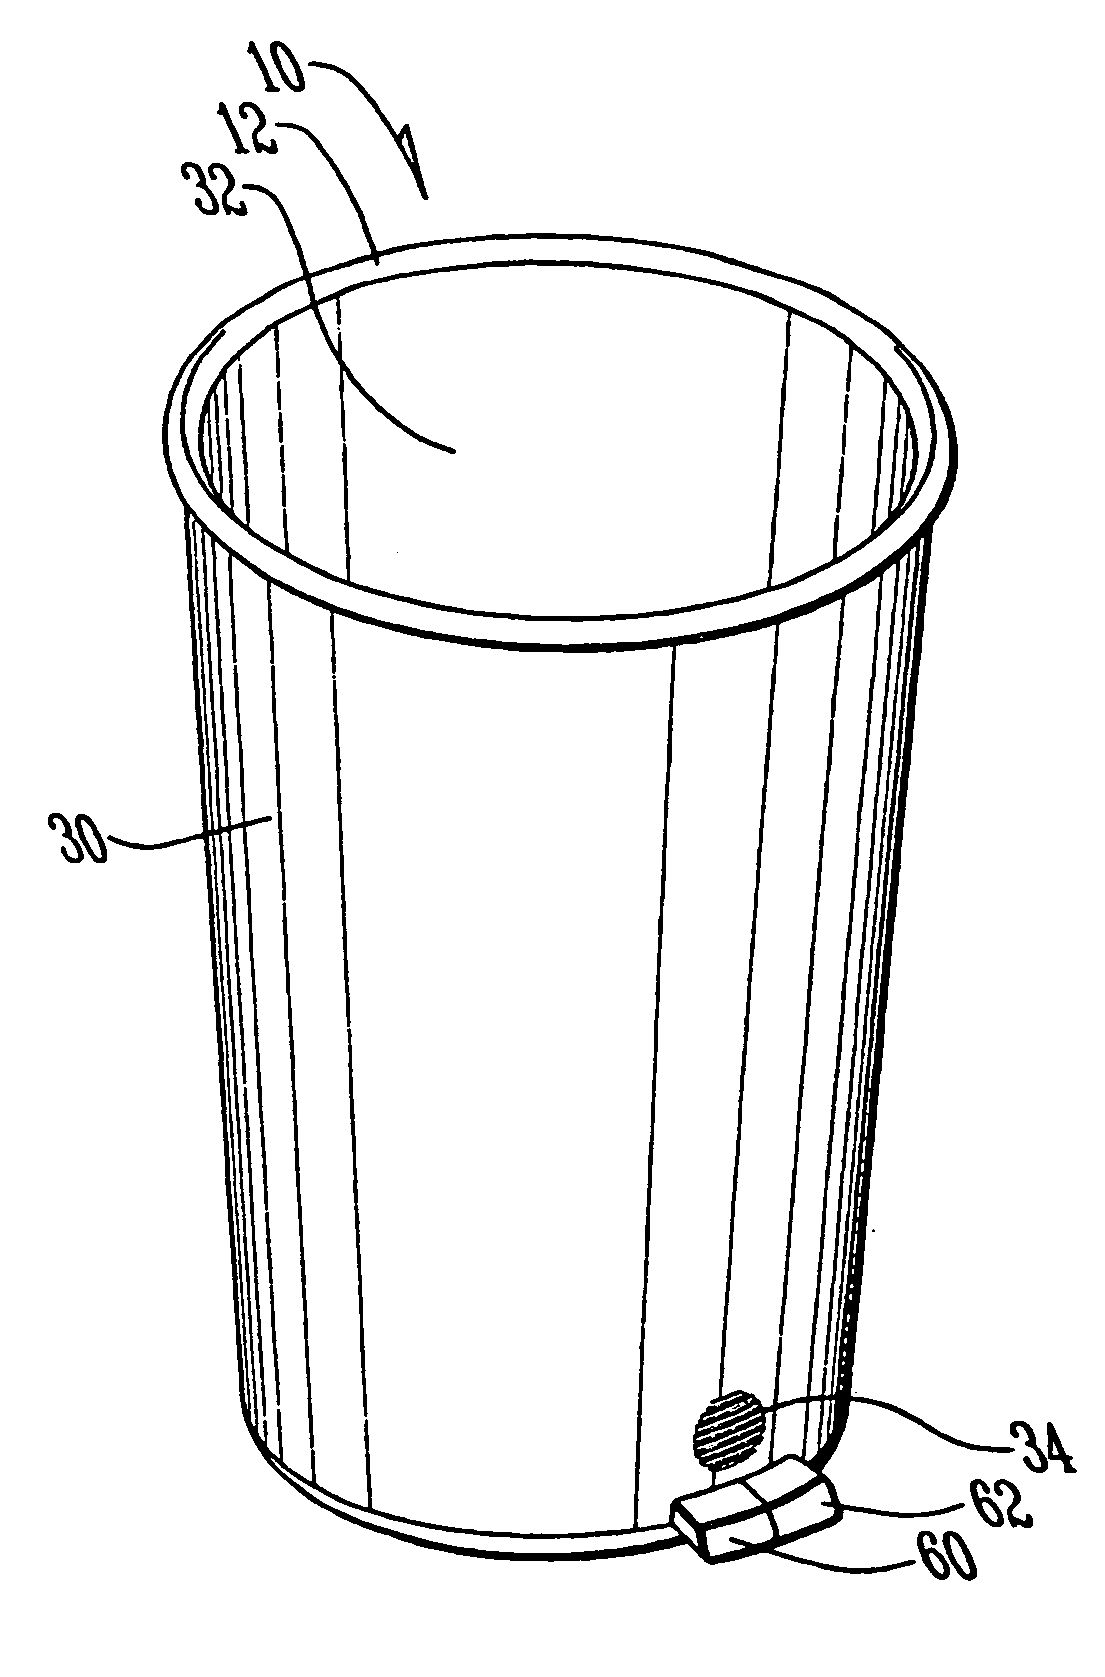 Container for use with flexible bags